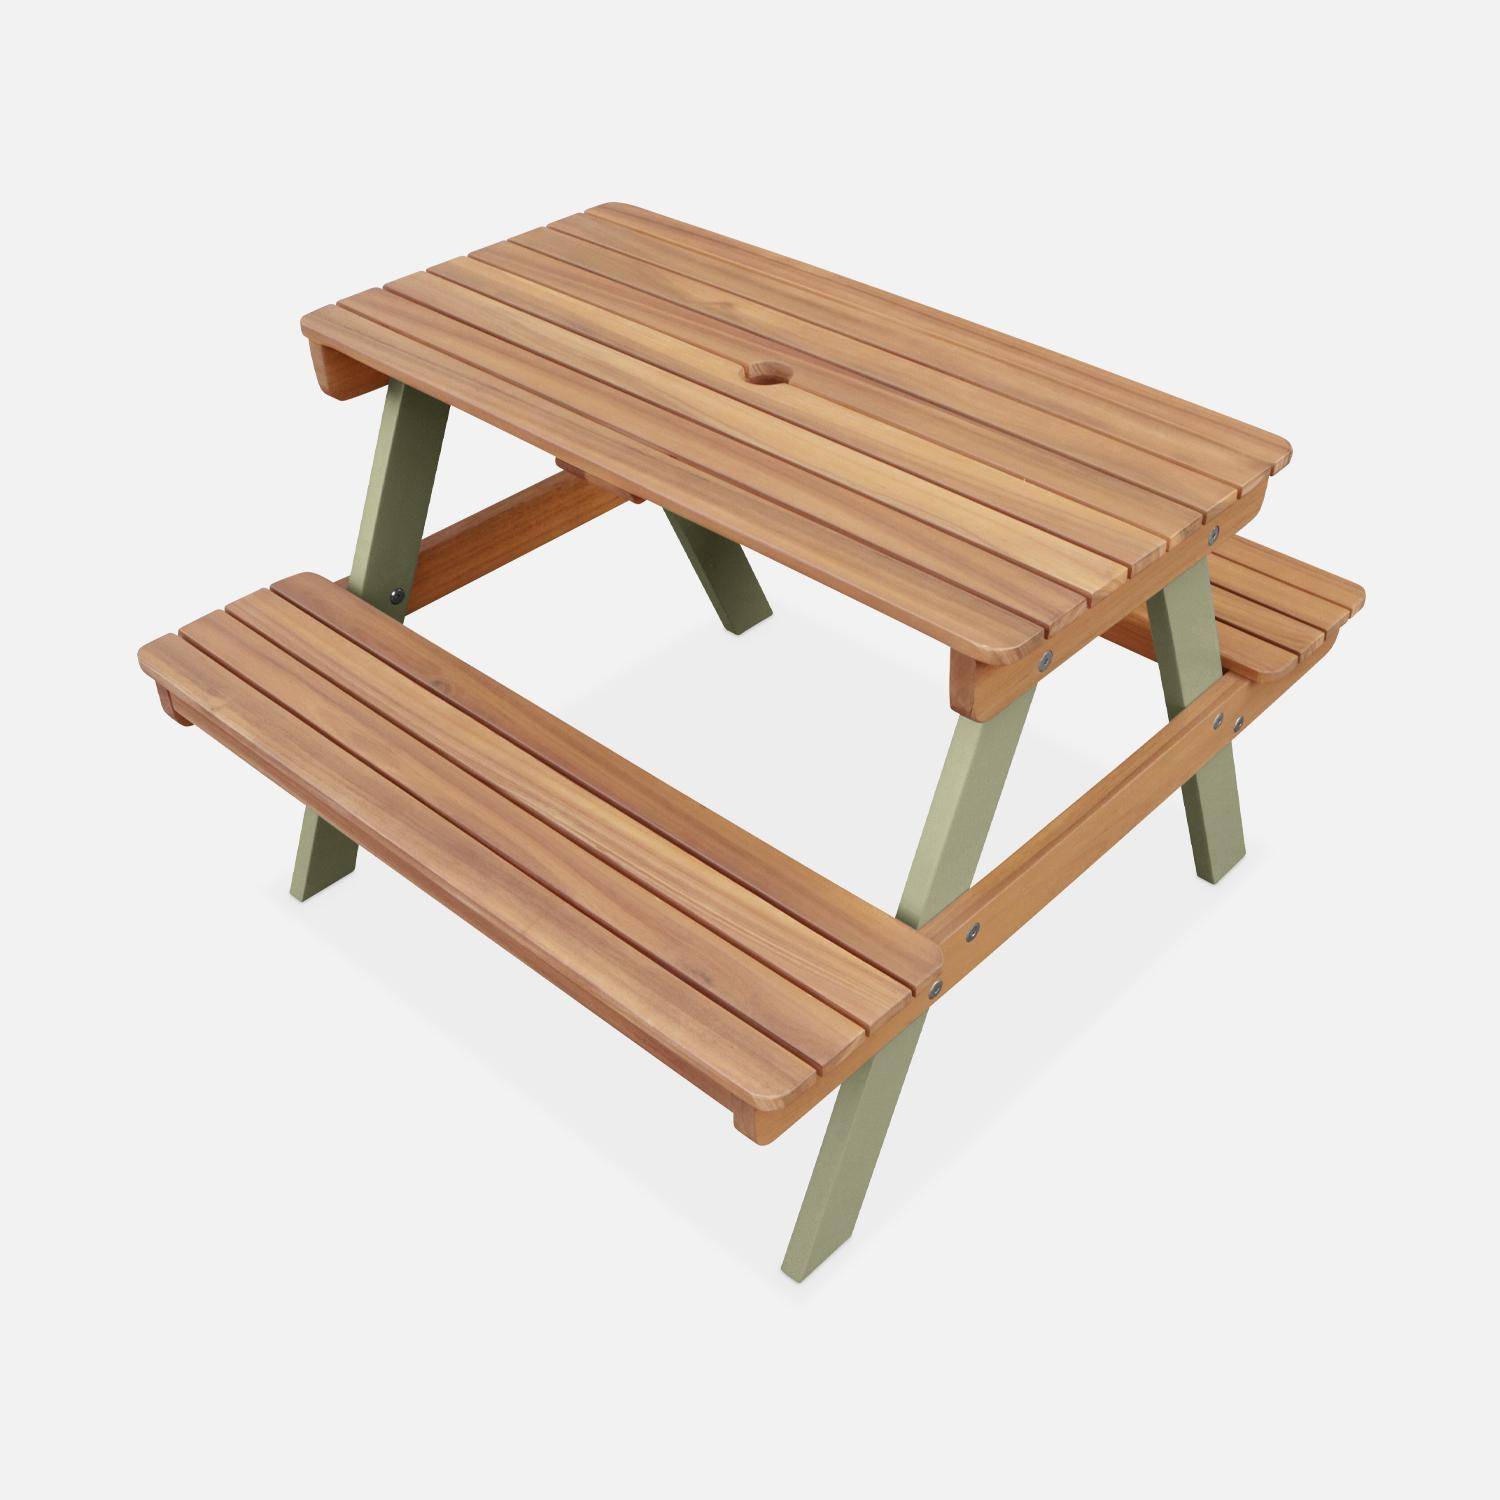 Acacia wood picnic table for children, 2 places, colour light teak and grey green Photo4